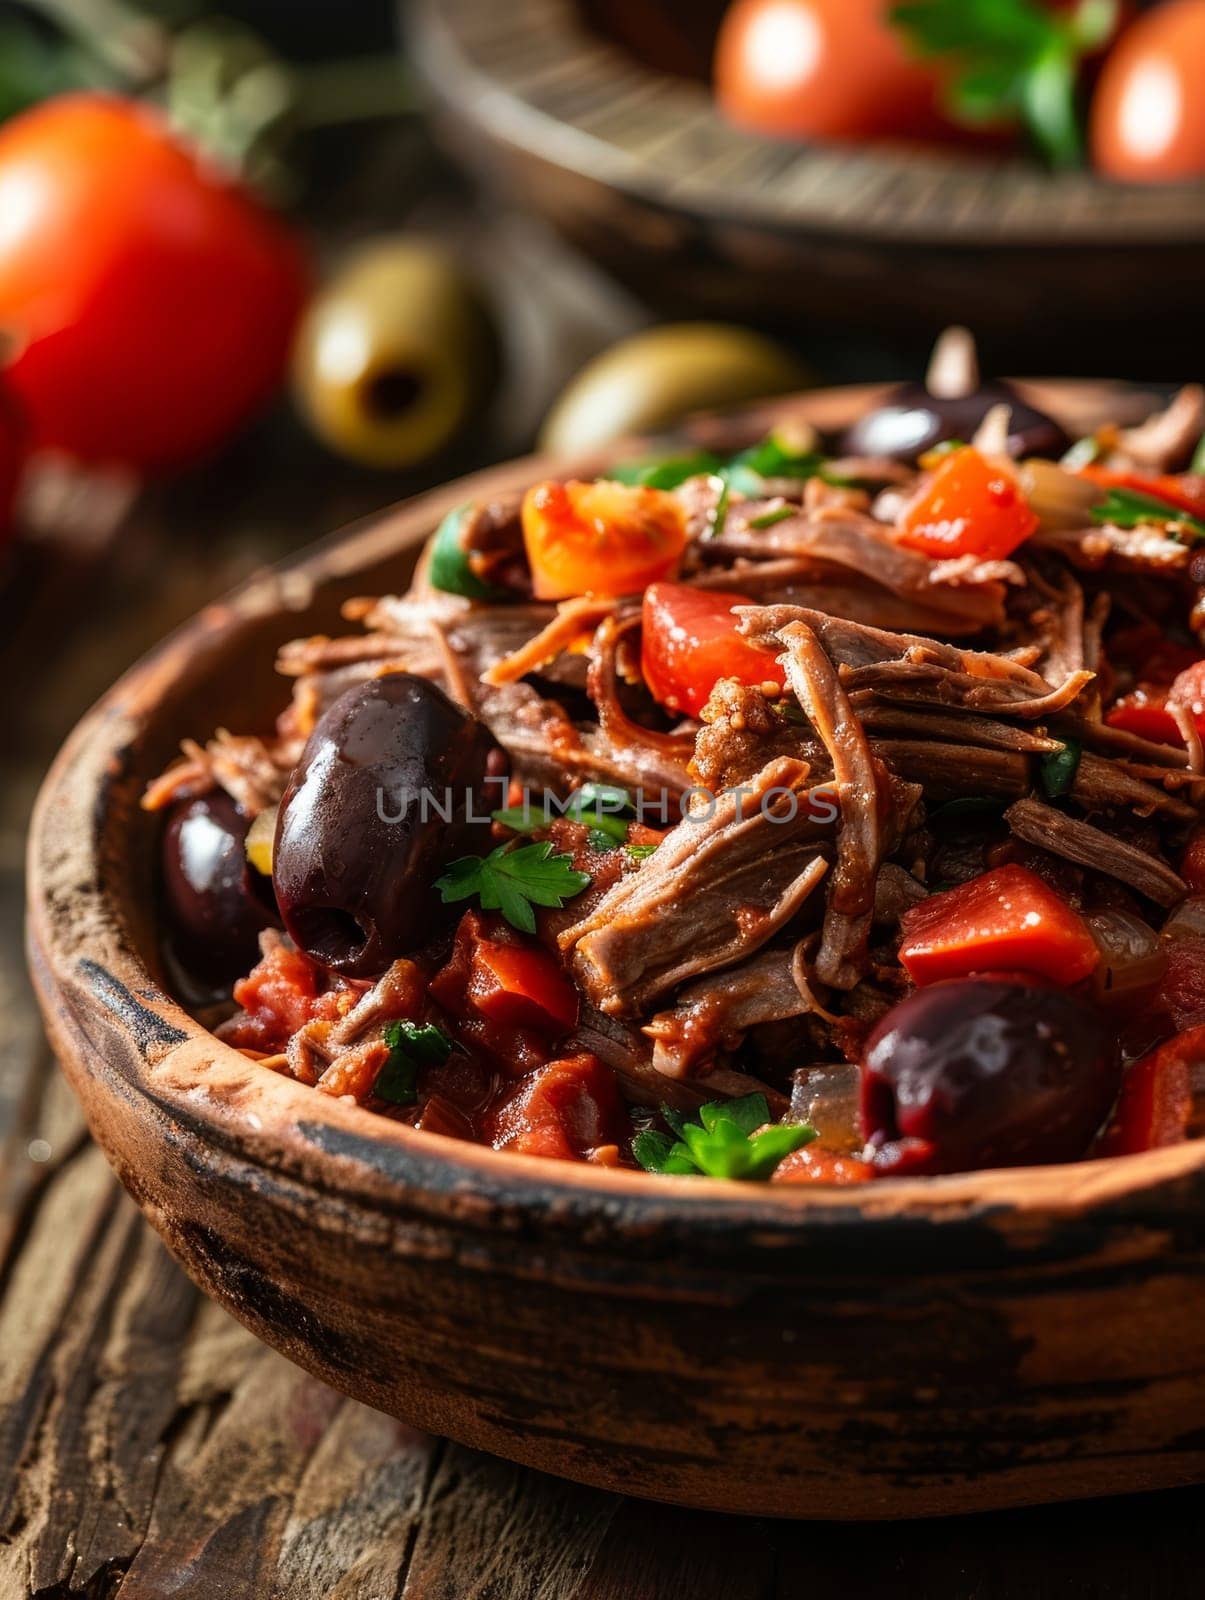 Authentic Cuban ropa vieja, a traditional shredded beef dish simmered with tomatoes, olives, and fragrant spices. Comforting Latin American staple is a delicious representation of Cuban culinary